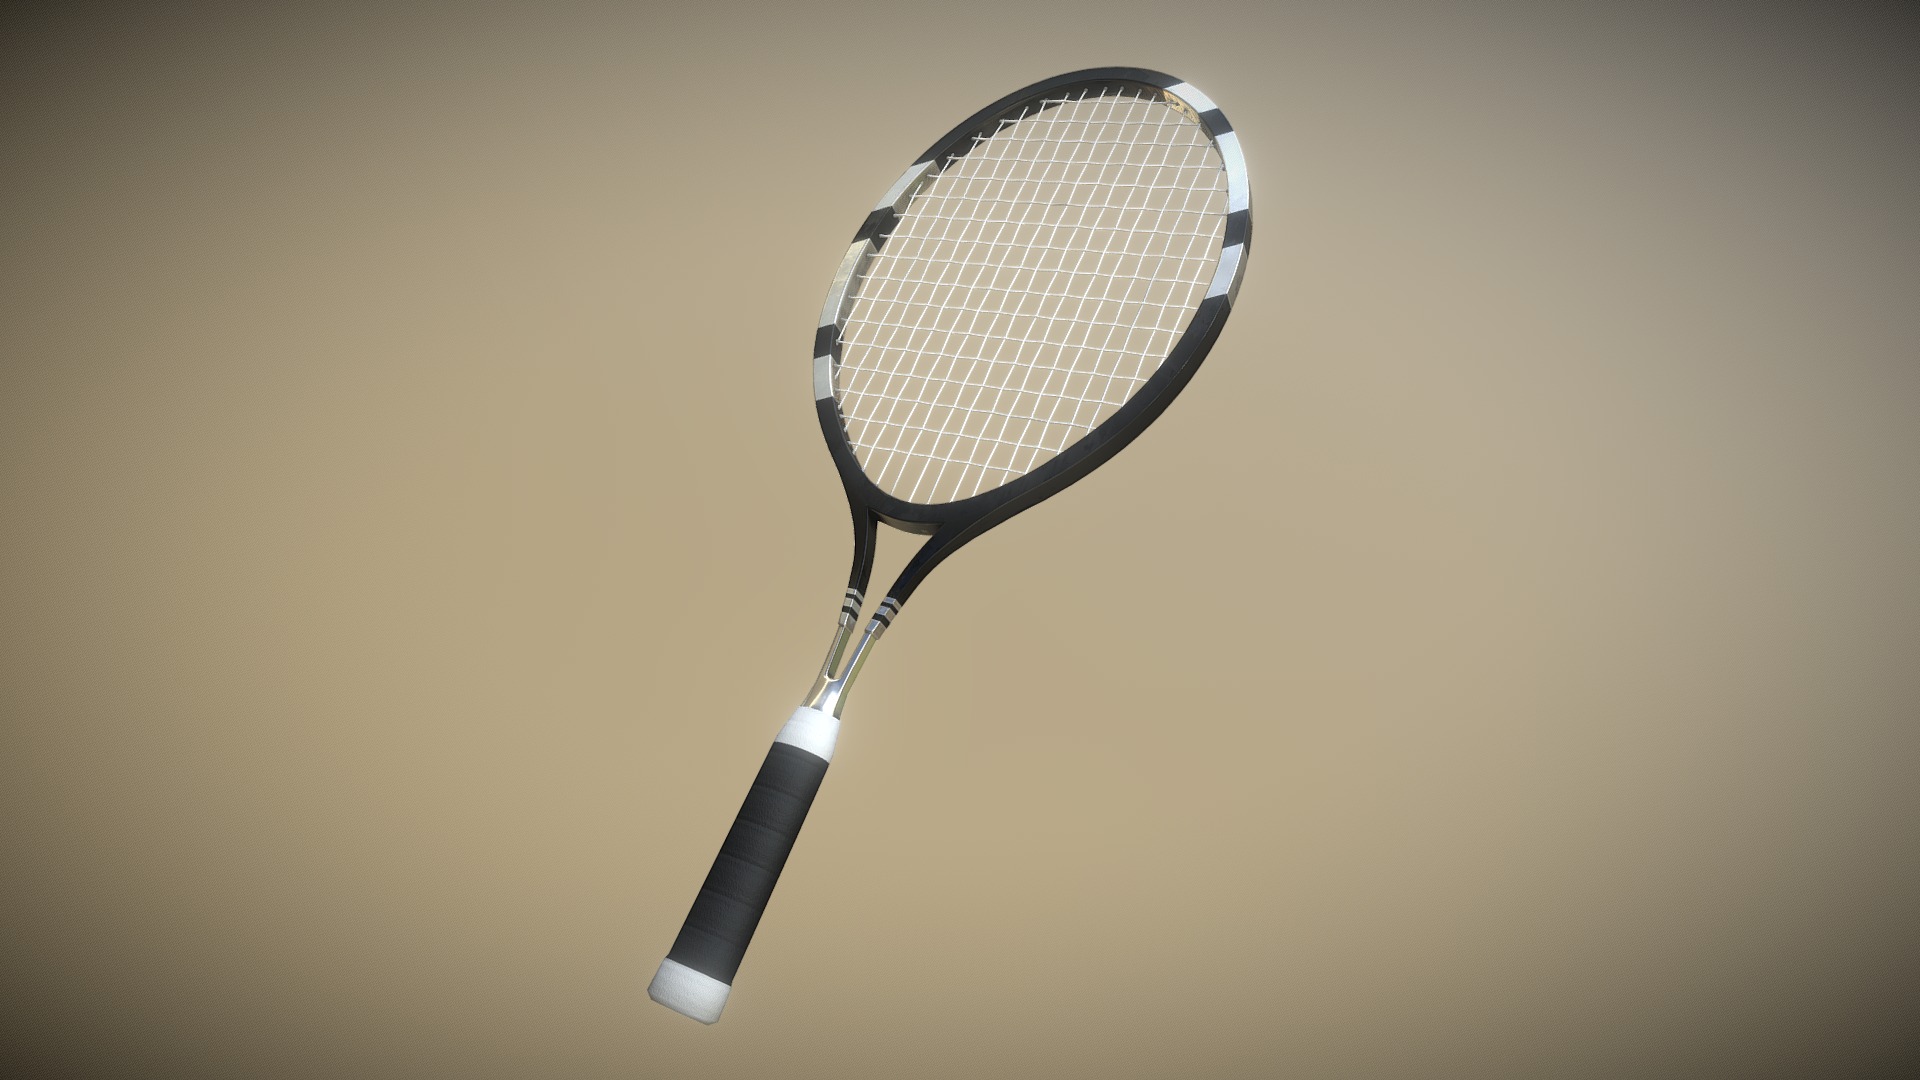 3D model Tennis Racket – Black Silver - This is a 3D model of the Tennis Racket - Black Silver. The 3D model is about a tennis racket on a table.